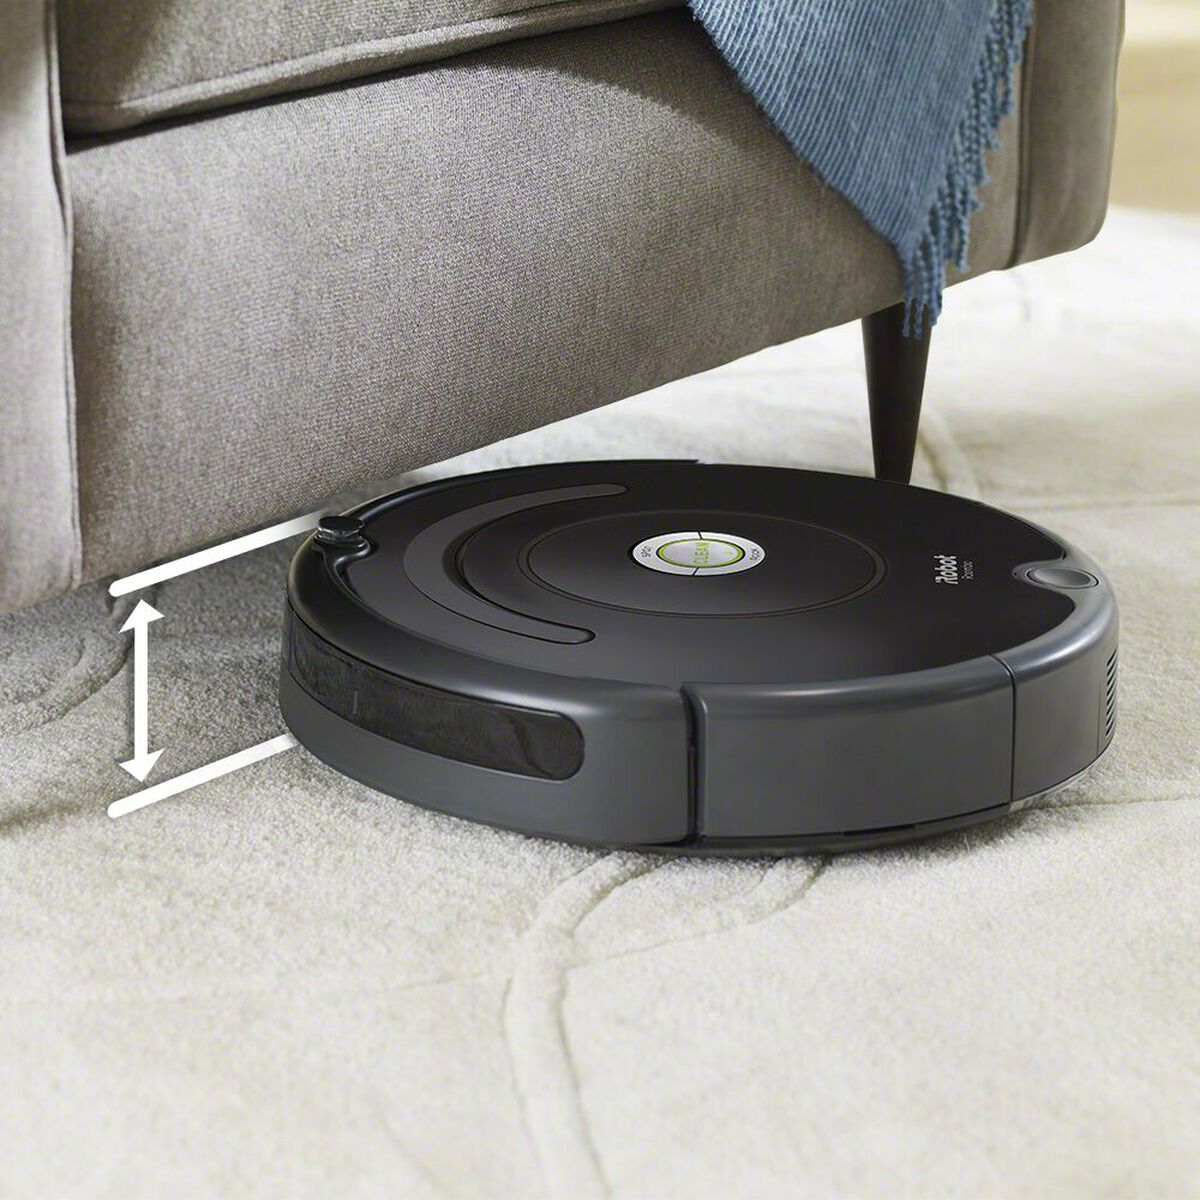 Roomba® 614 Robot Vacuum, , large image number 3